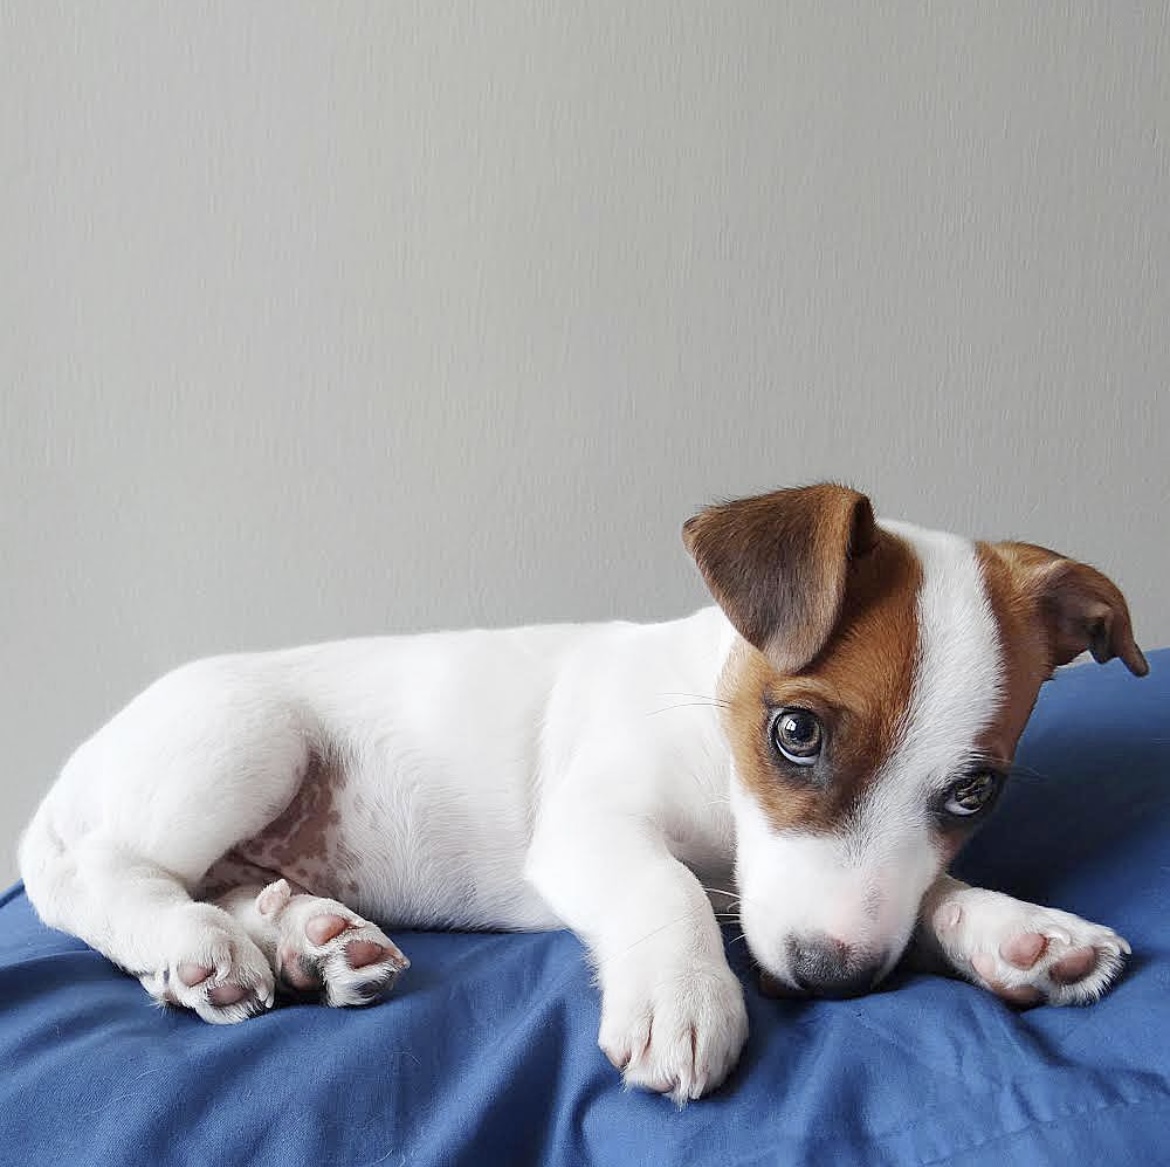 brightening up your day with some baby astro📷

#puppies #doglovers #jackrussellnation #9gag #barked #animalsdoingthings #jrt #jackrusselldog #astro #dogs #dogsofinstagram #dog #dogstagram #jackrussellofinstagram #cute #cuteness #cutenessoverload #doggo #doglovers #doglove…